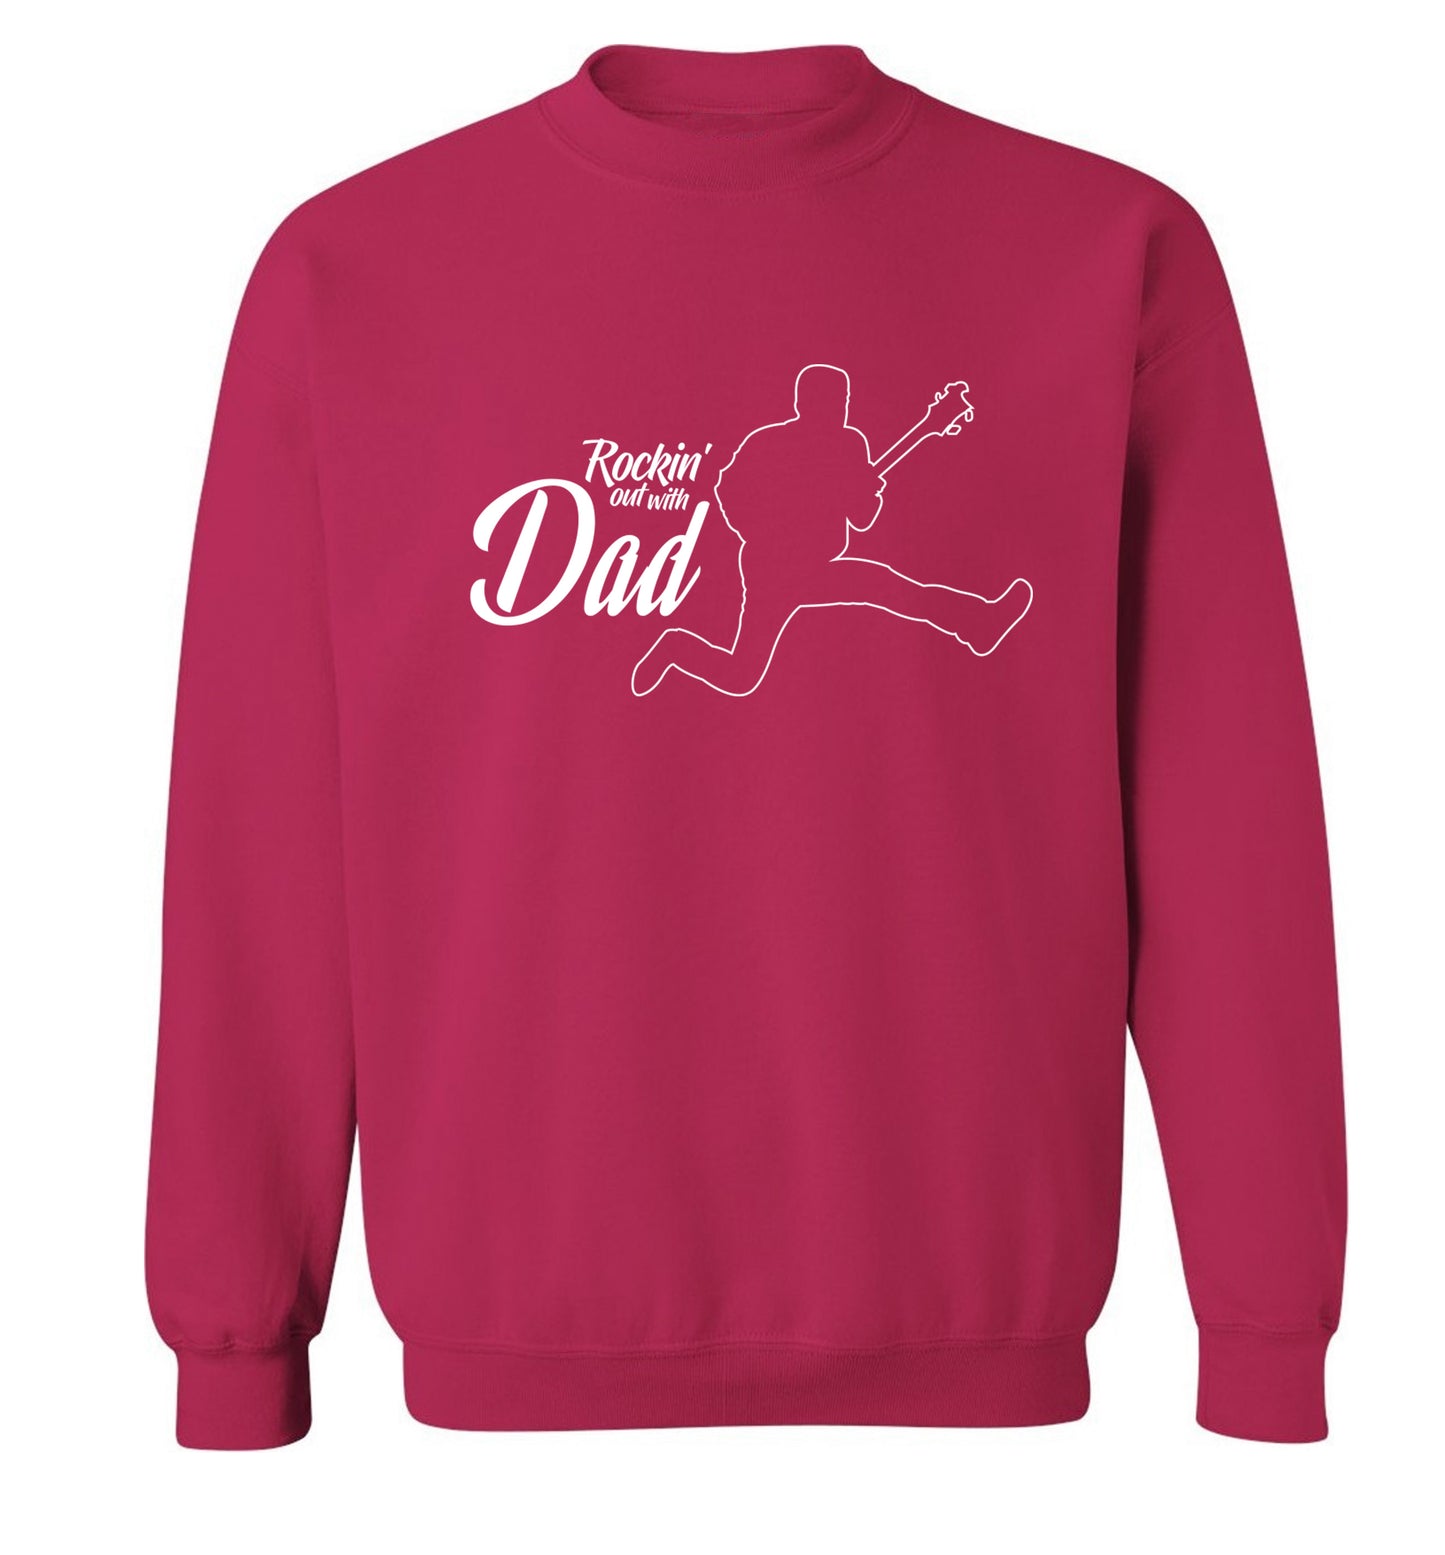 Rockin out with dad Adult's unisex pink Sweater 2XL